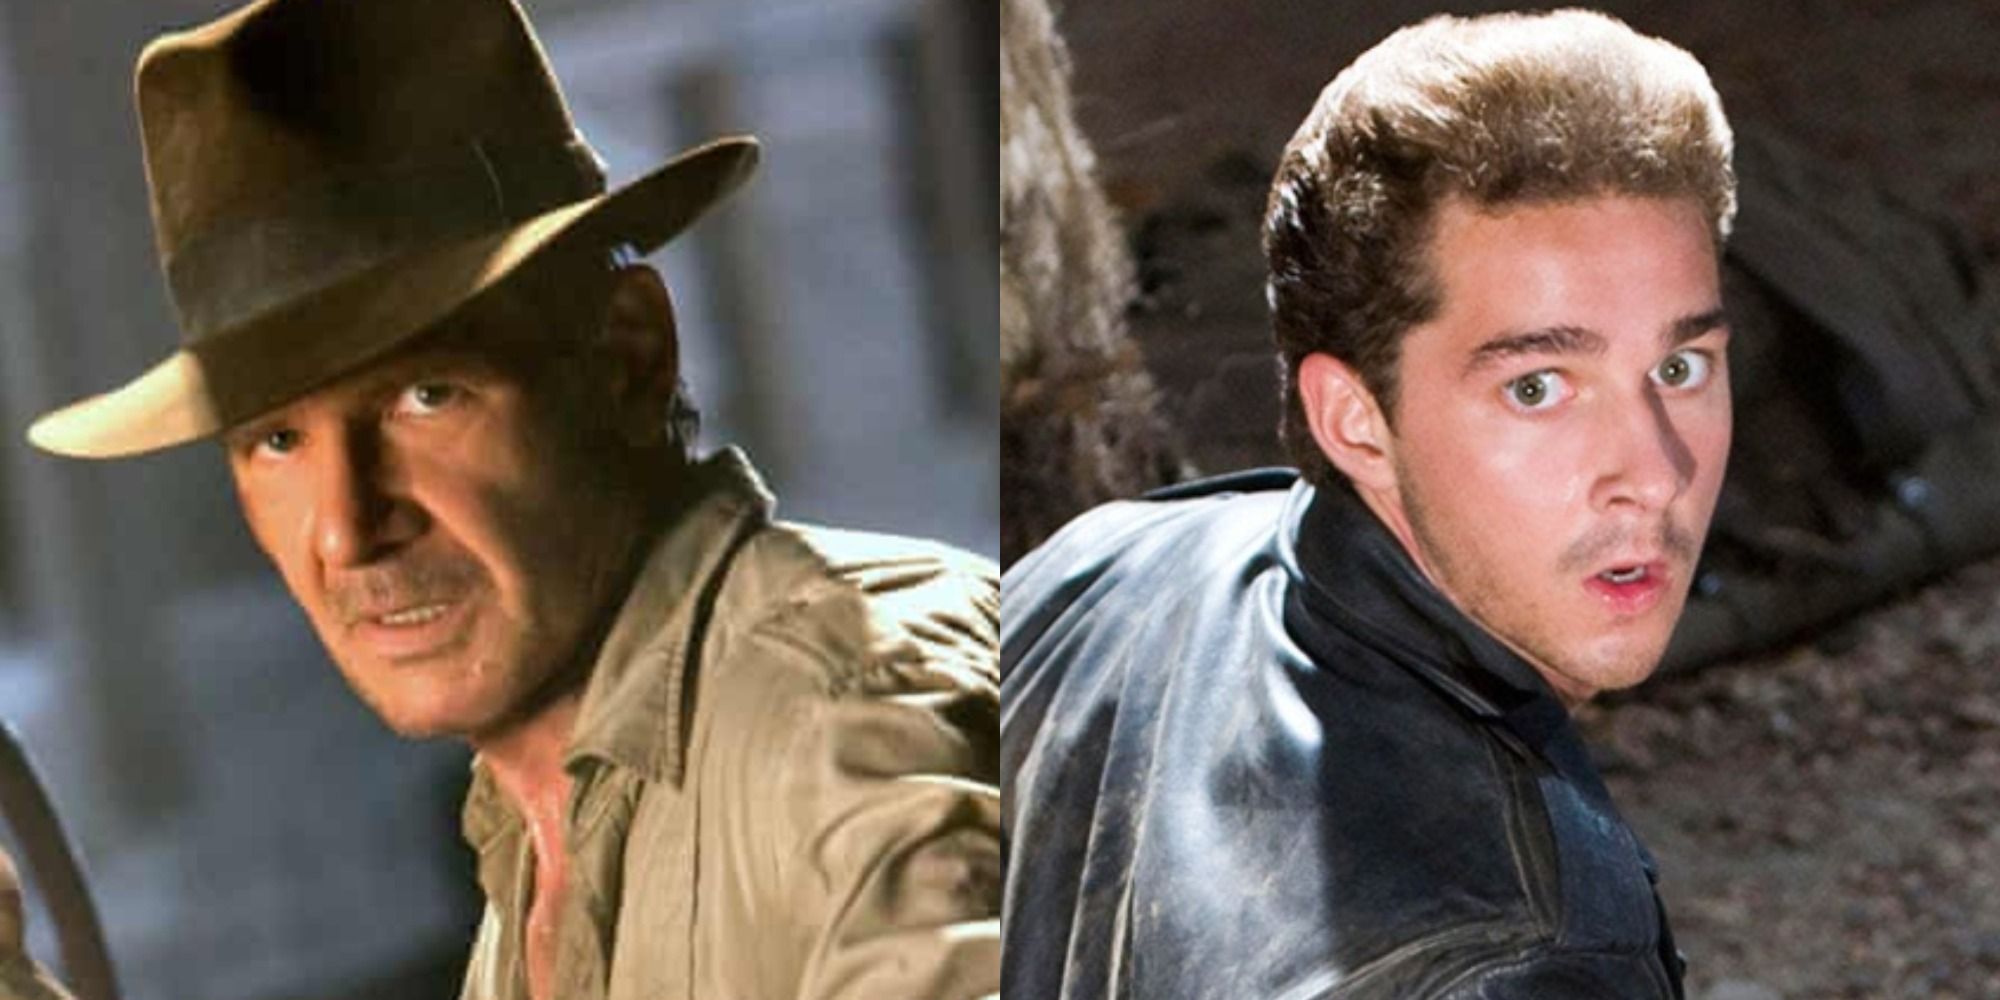 Indiana Jones (Harrison Ford) beside Mutt Williams (Shia LaBeouf) in Indiana Jones and the Kingdom of the Crystal Skull